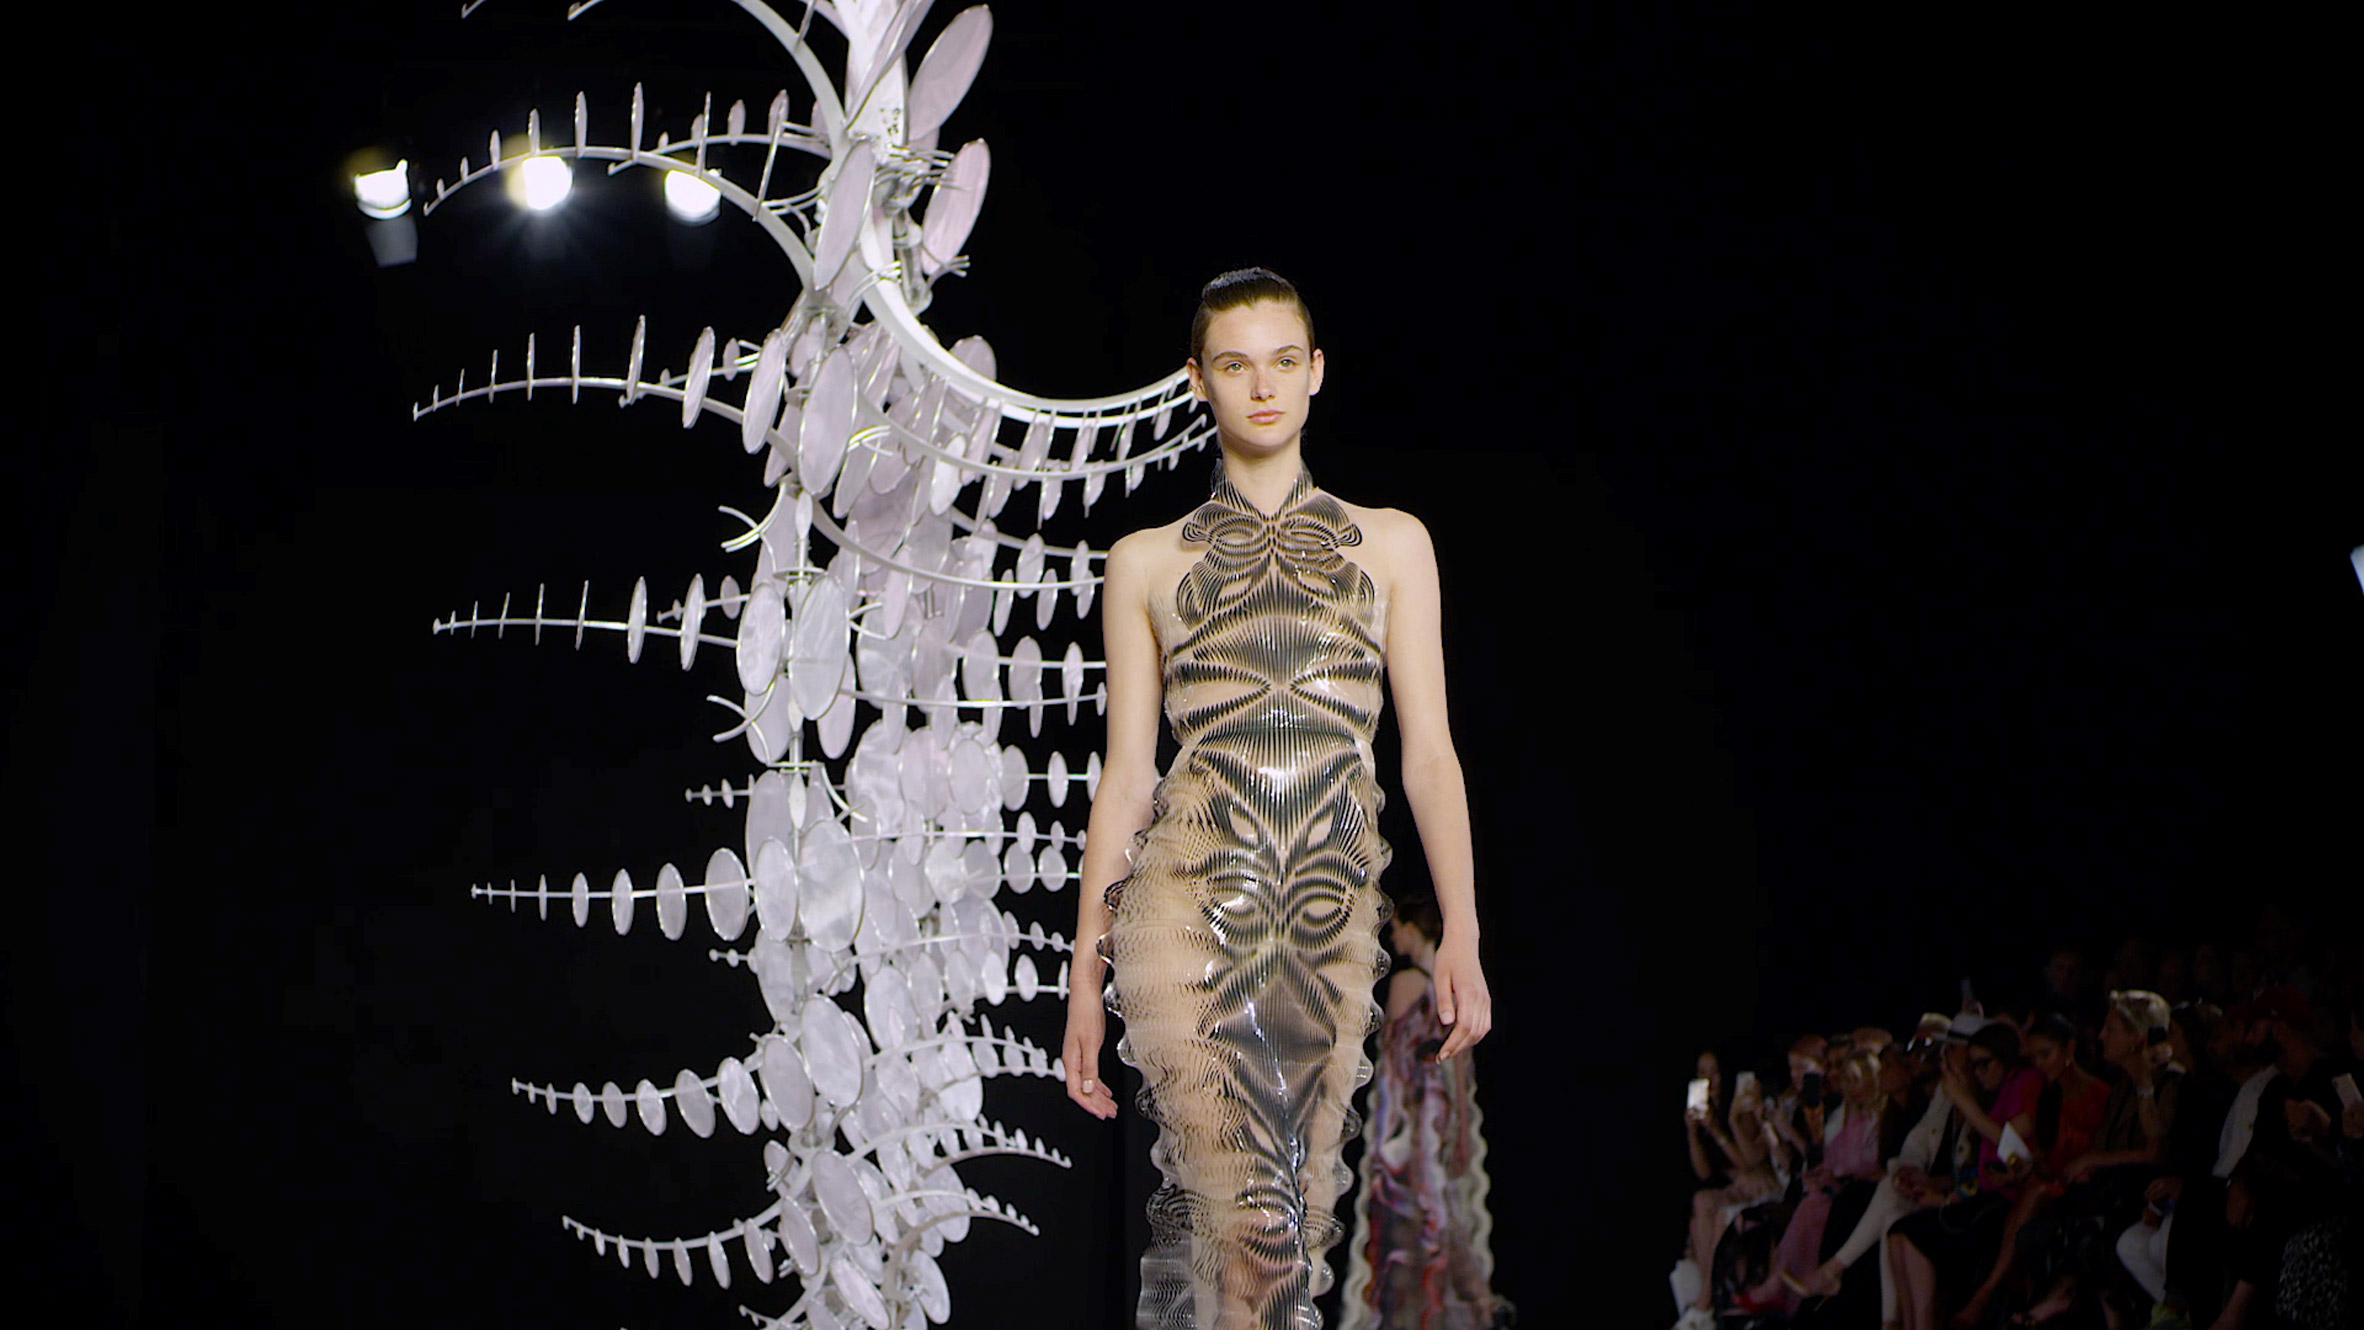 Infinity Dress Is The Most Difficult I Have Ever Made Says Iris Van Herpen